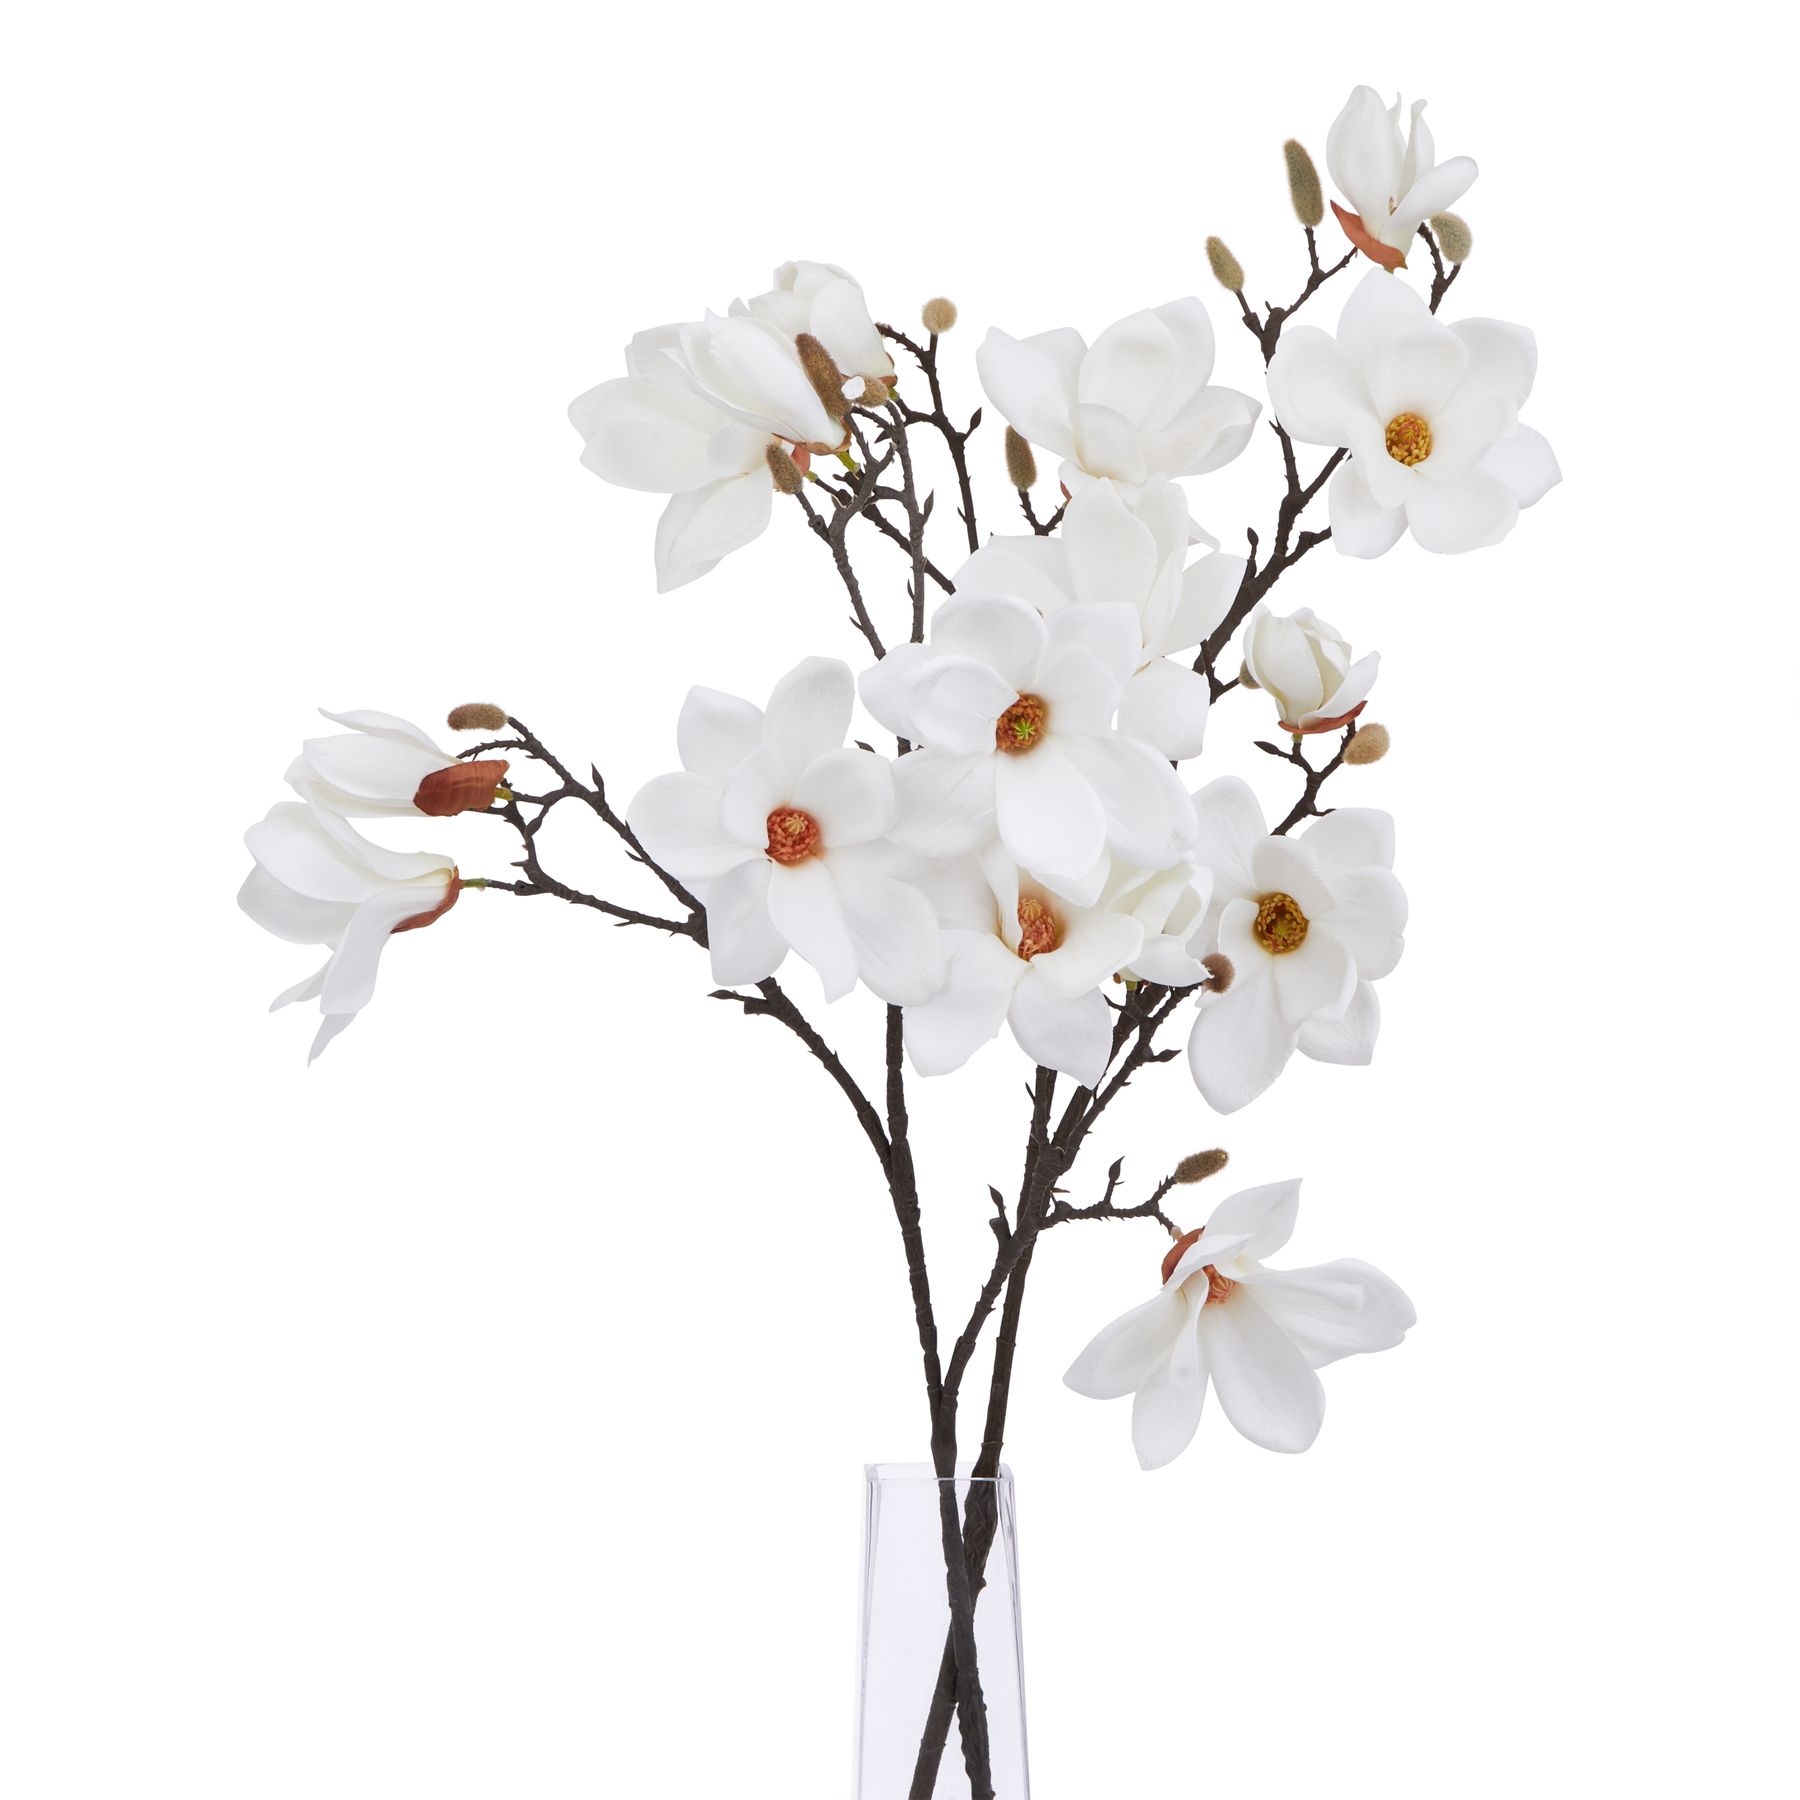 The Natural Garden Collection White Magnolia Stem - Image 3